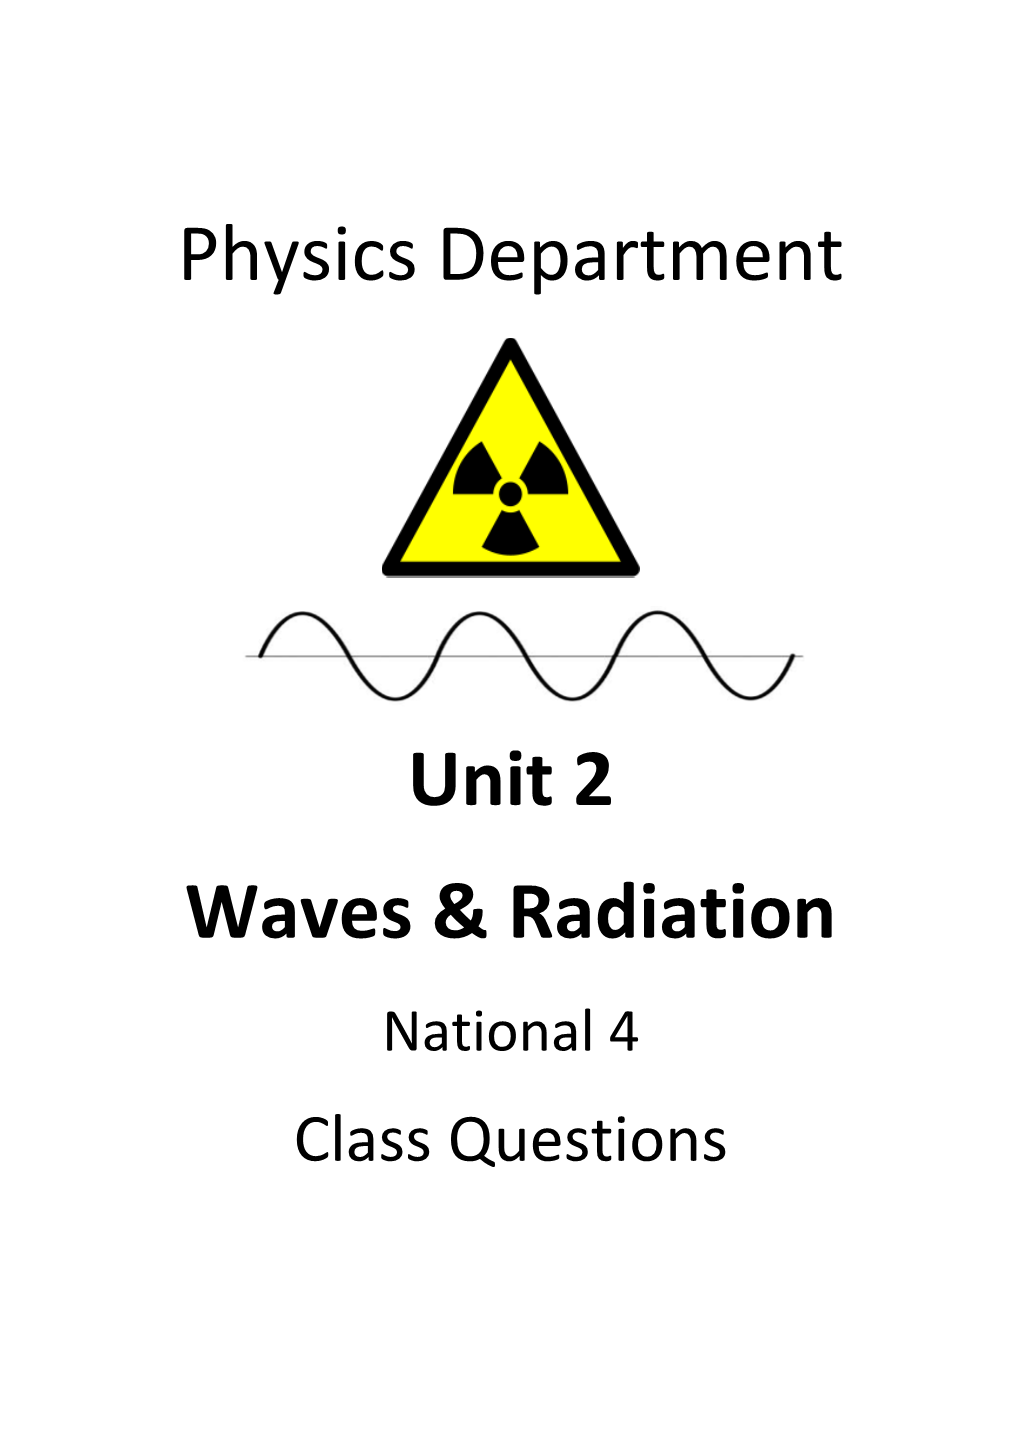 Unit 2 Waves and Radiation